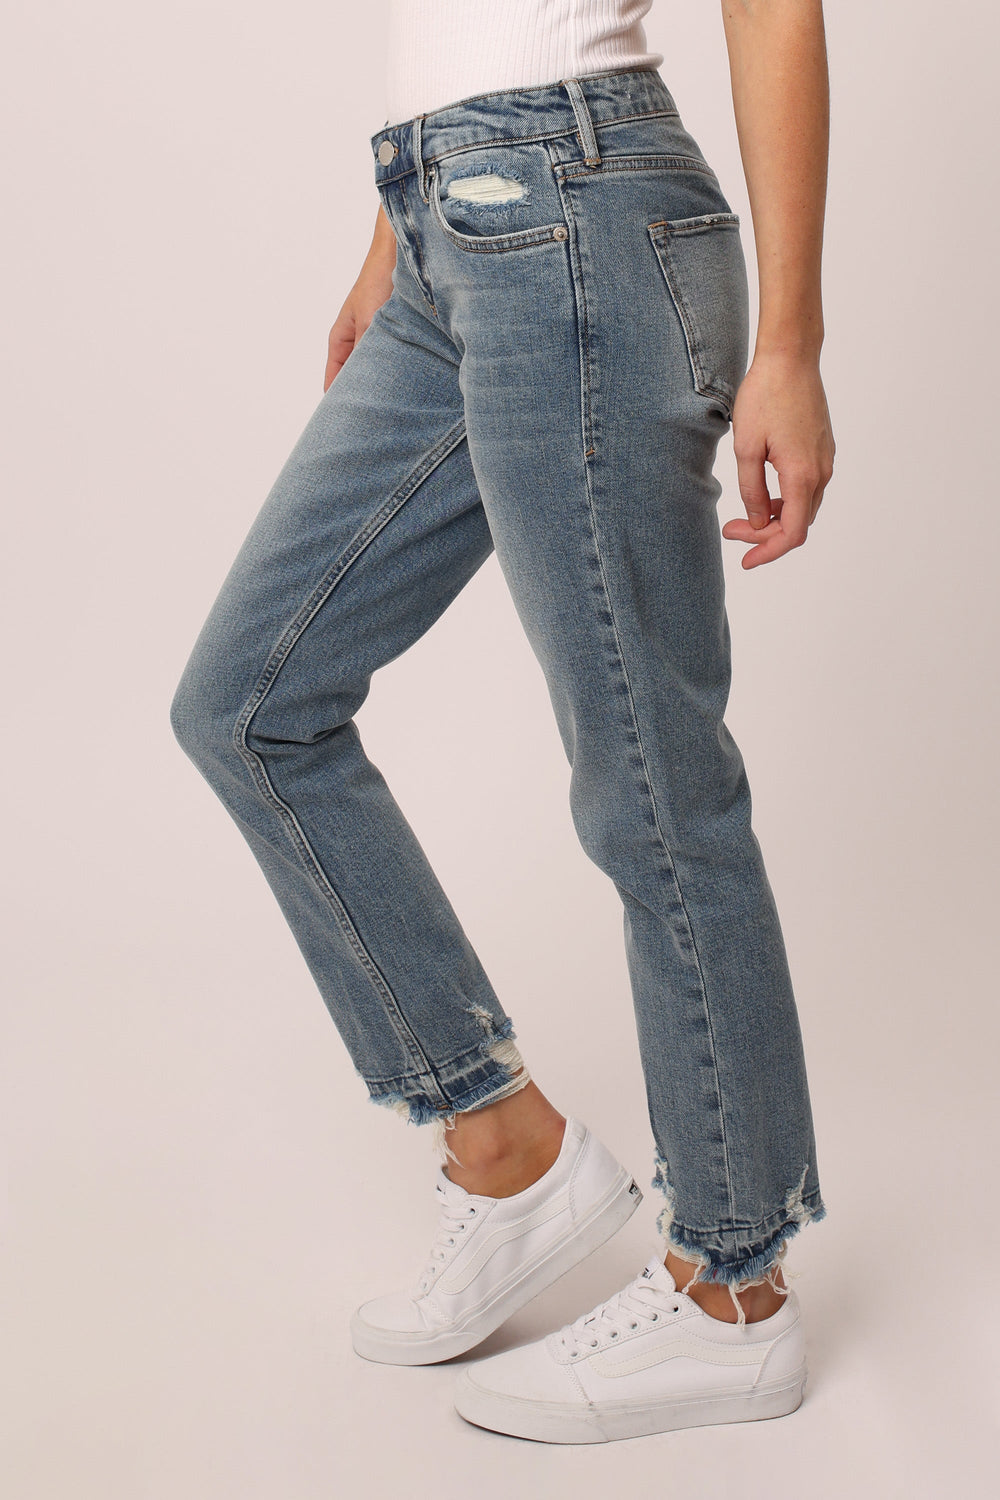 image of a female model wearing a BLAIRE HIGH RISE ANKLE SLIM STRAIGHT JEANS DACOSTA DEAR JOHN DENIM 